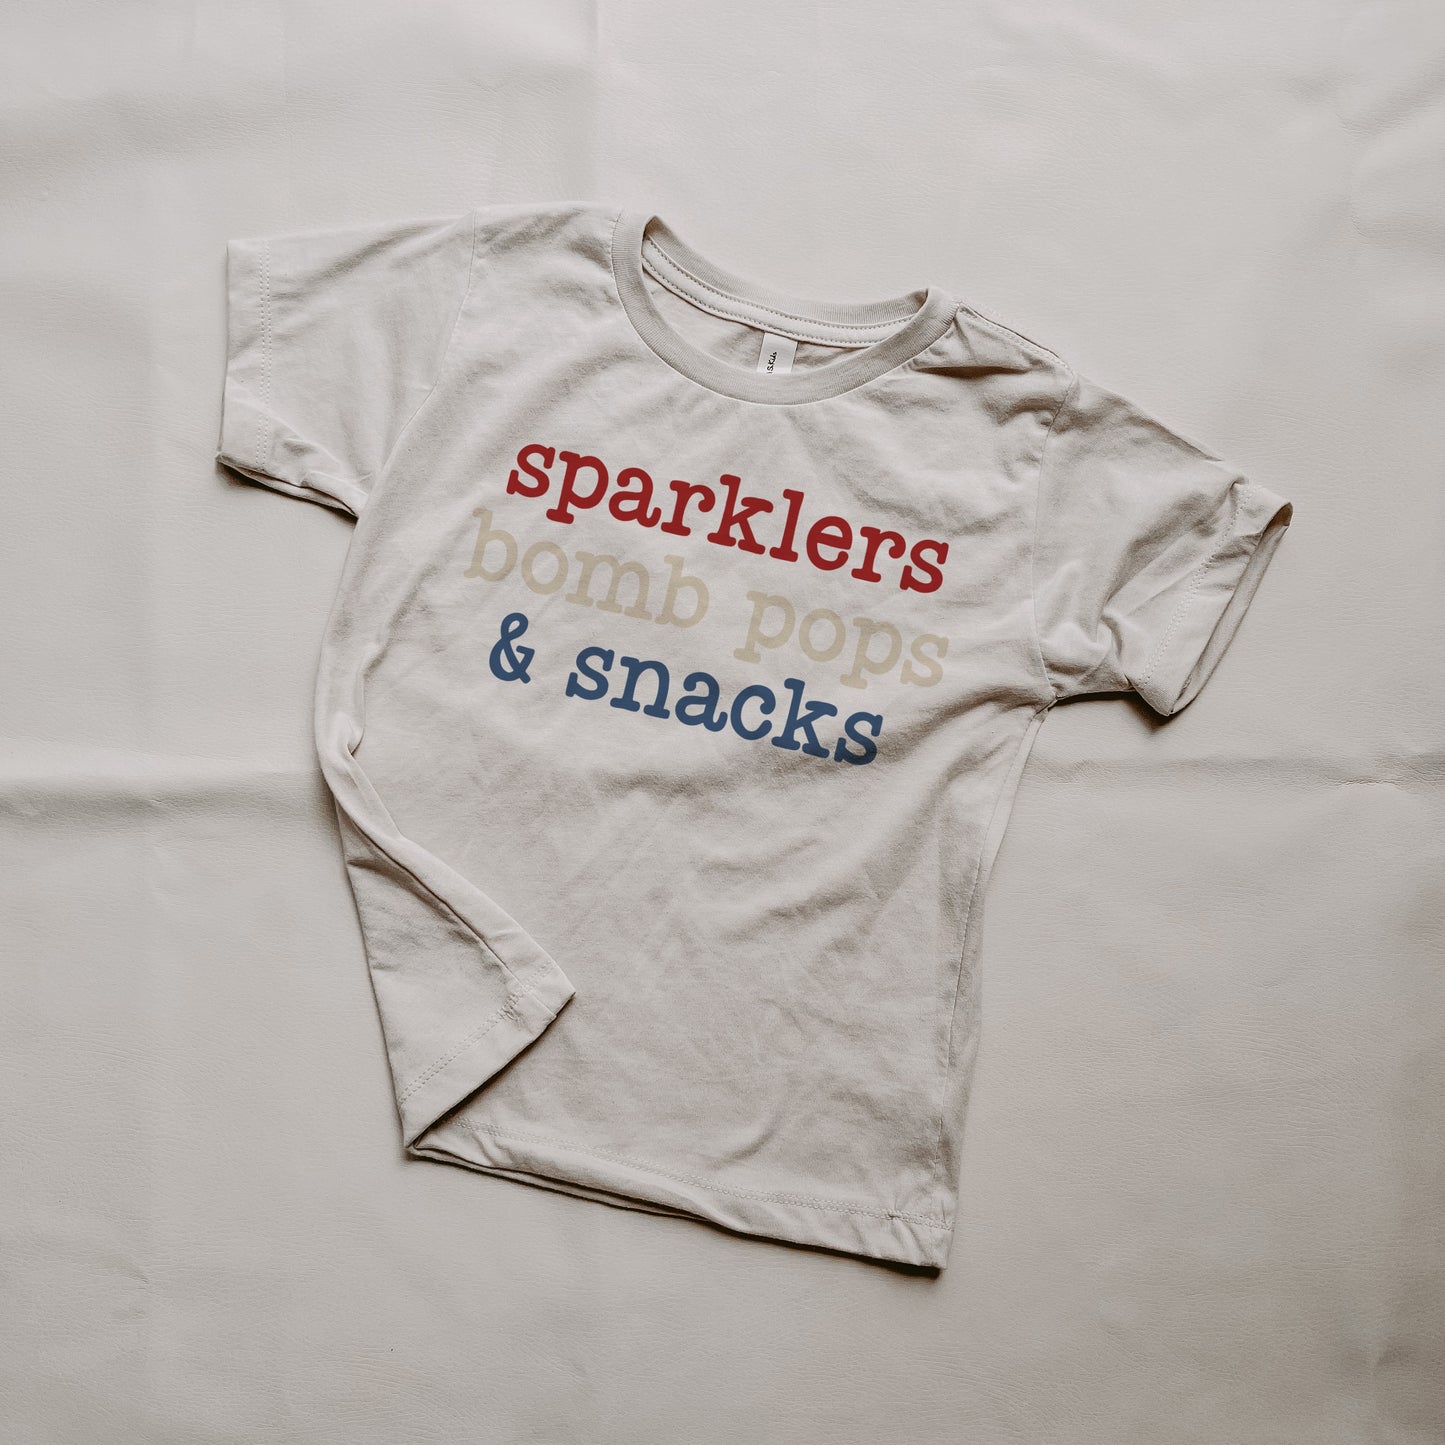 Sparklers Bomb Pops and Snacks Tee or Onesie